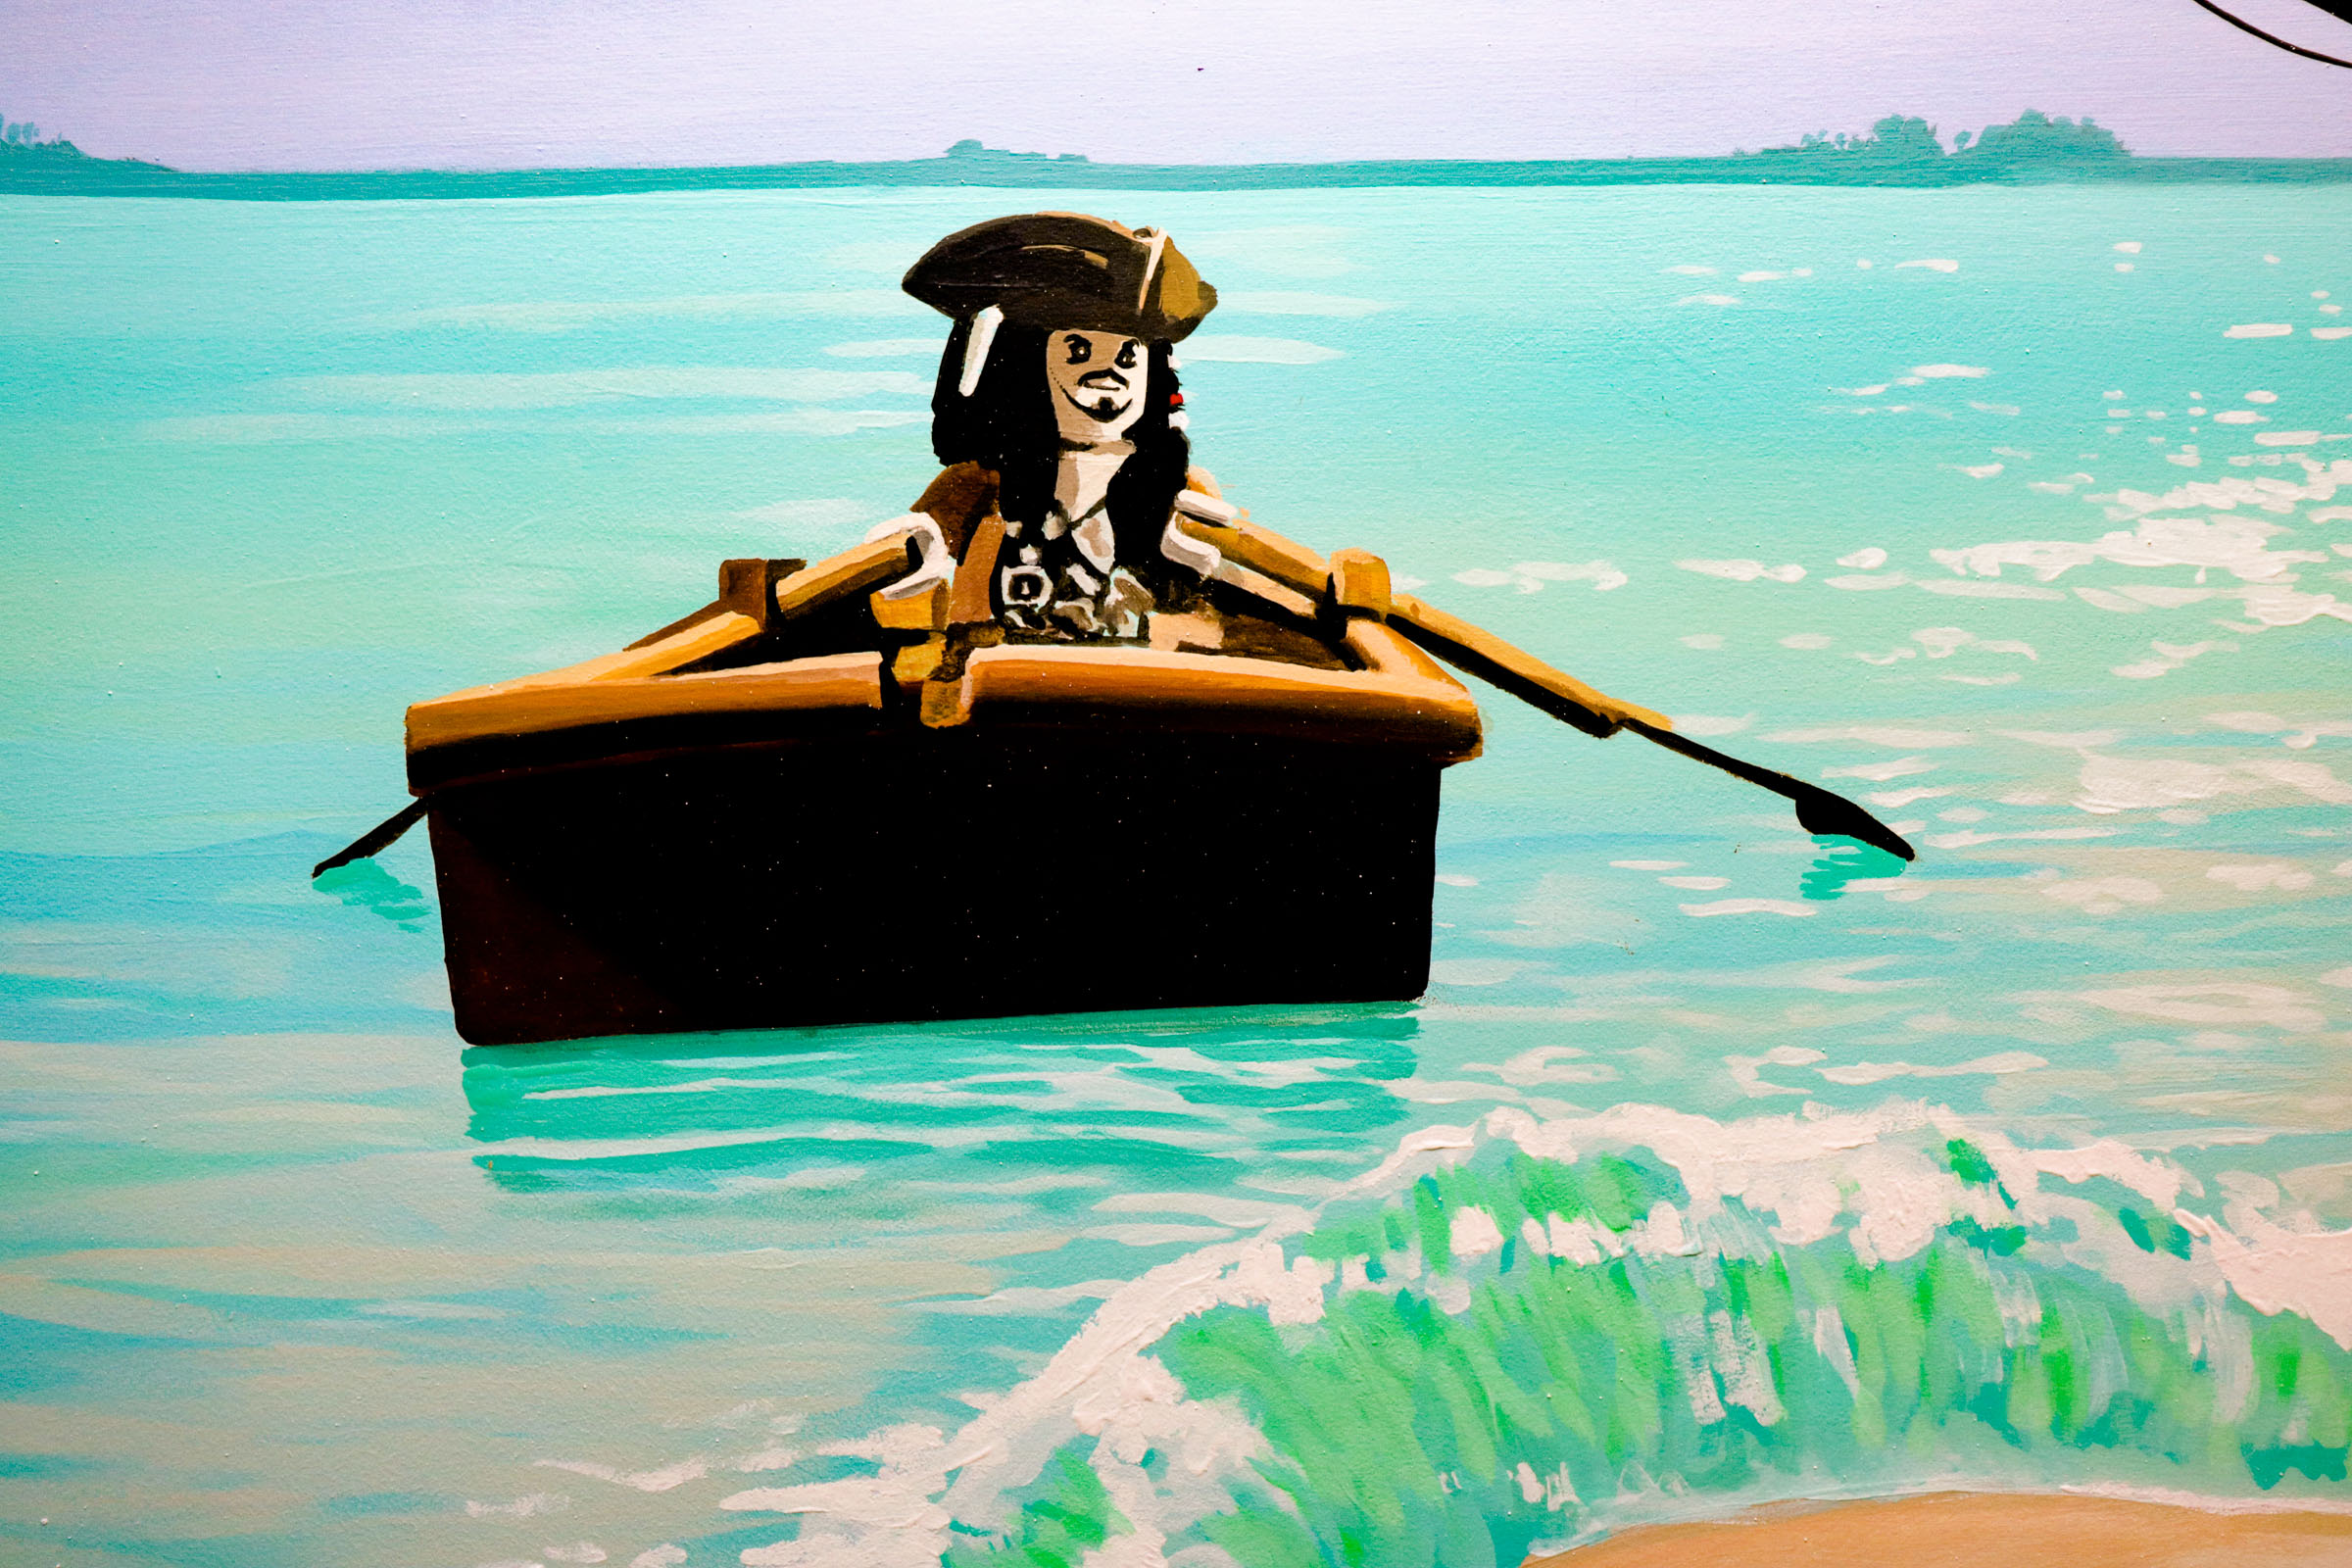 Lego Jack Sparrow rowing a little boat in wallmural